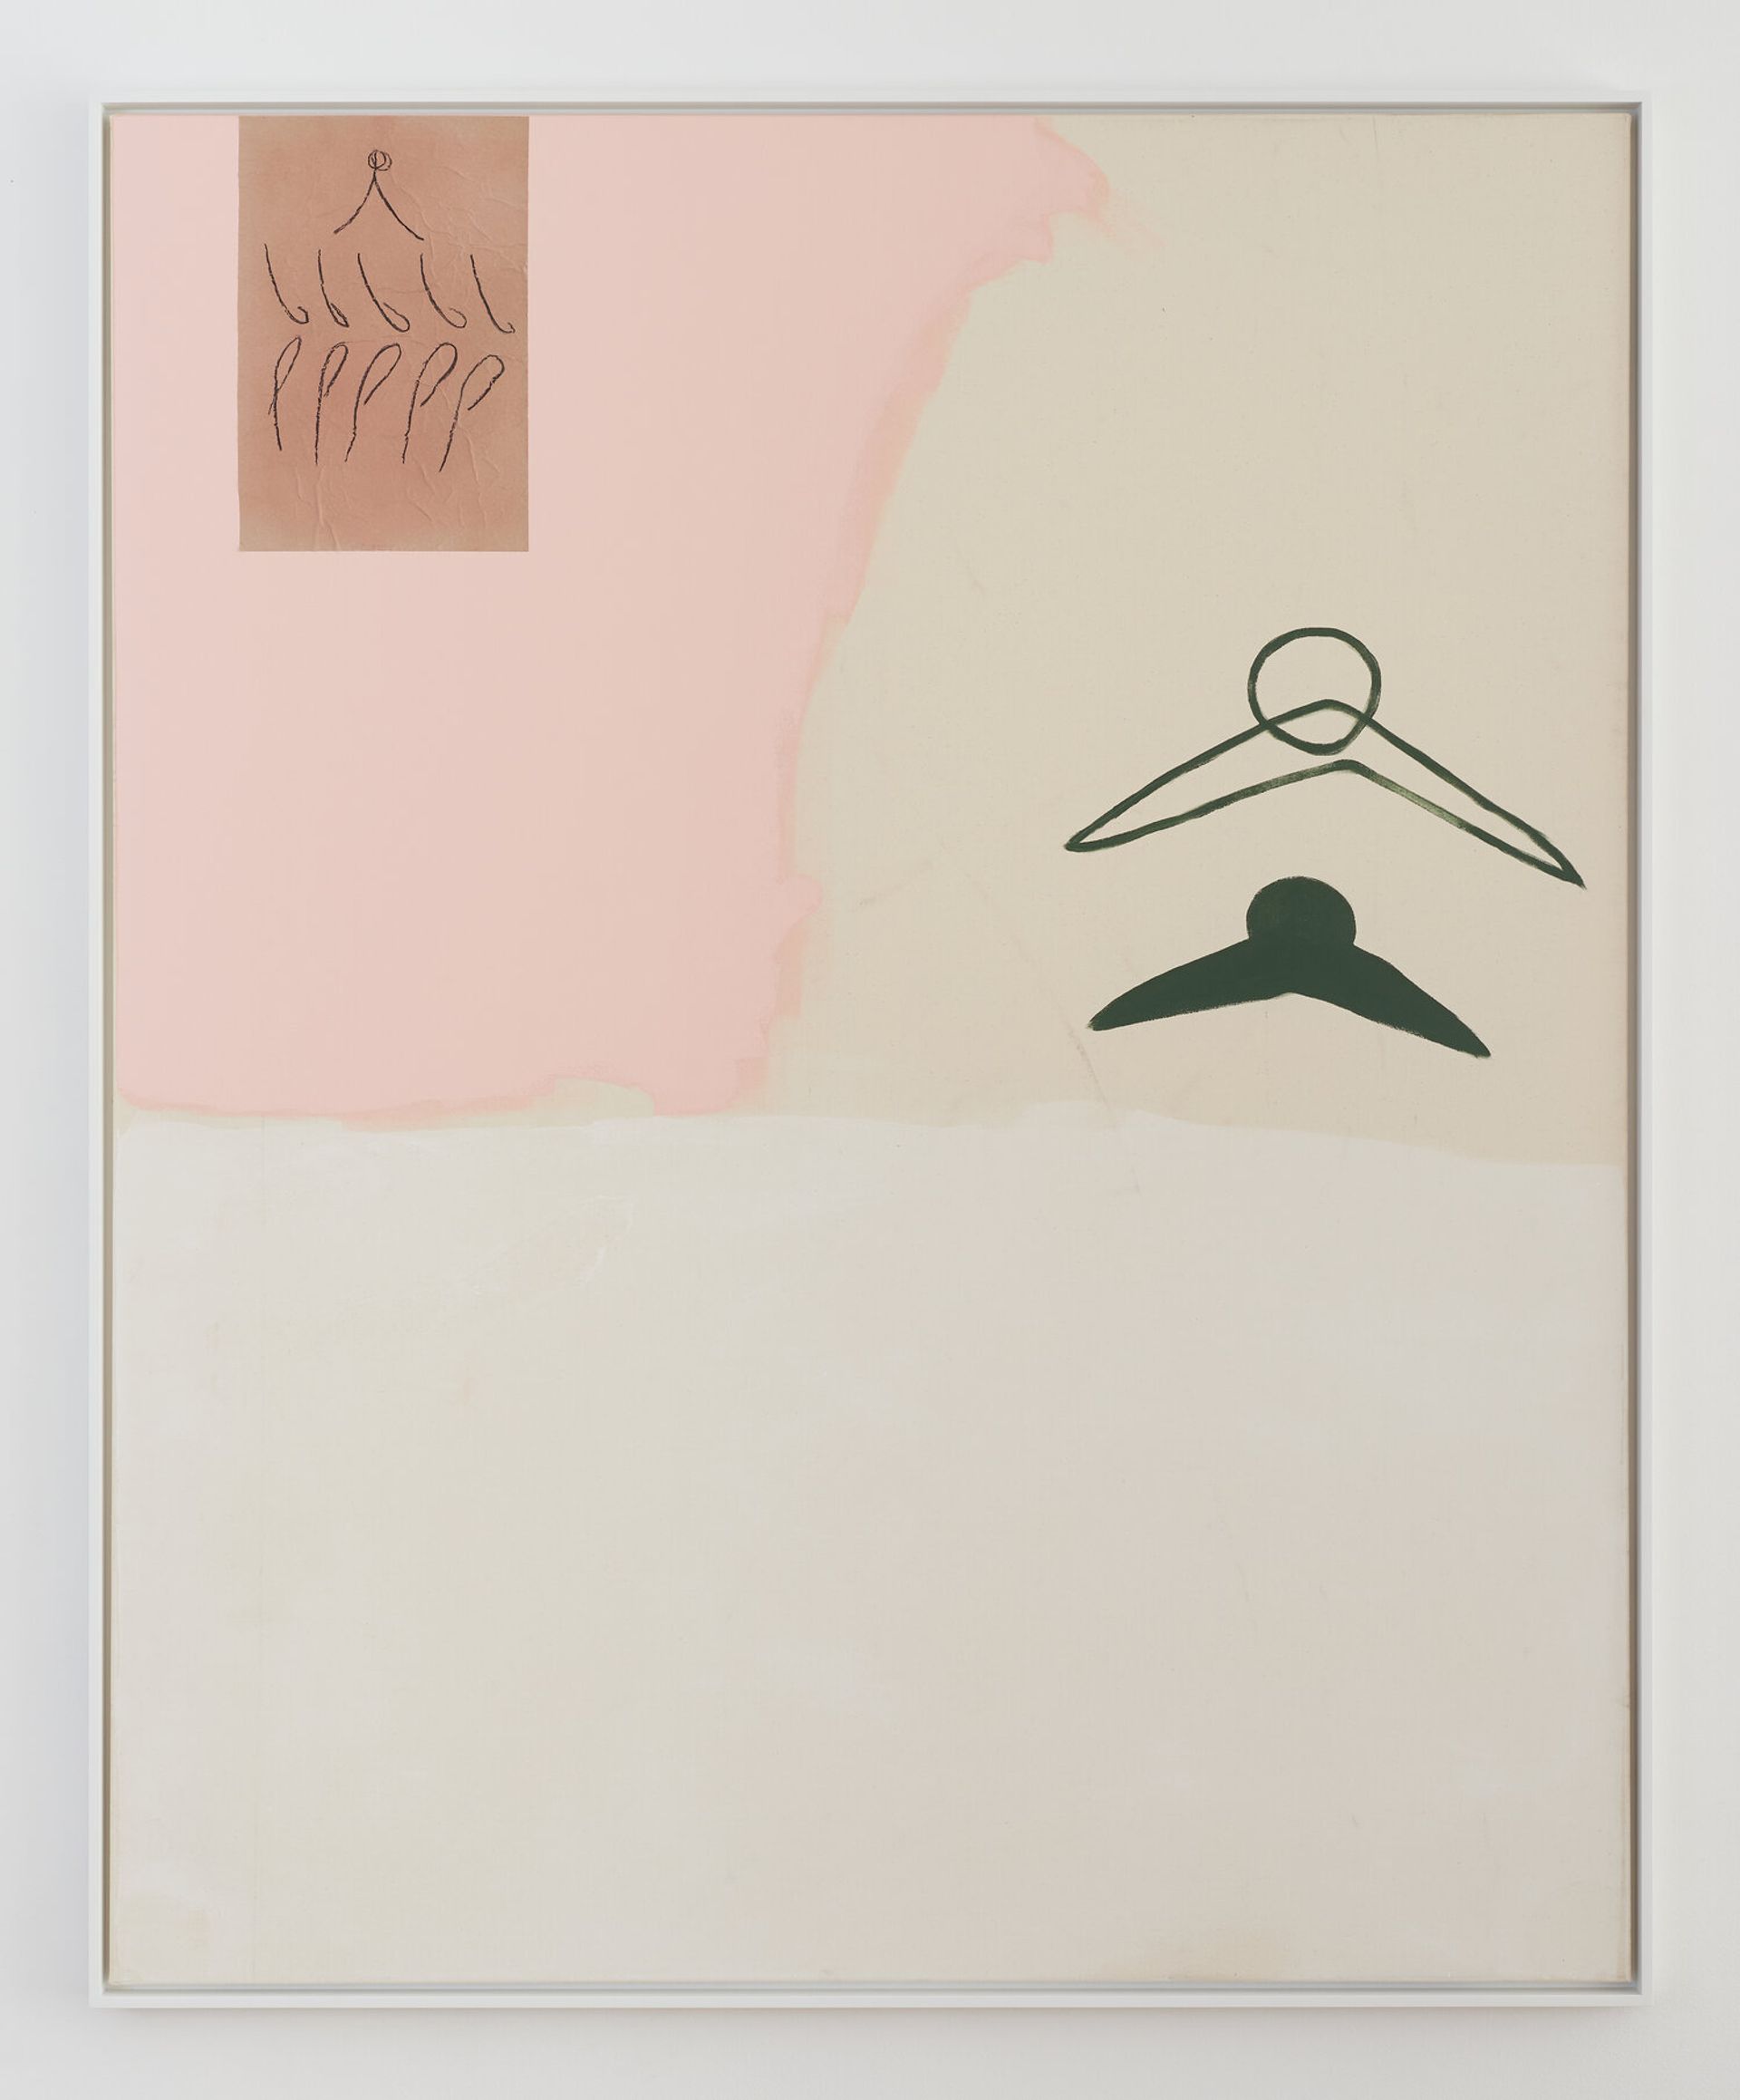 Malte Zenses, girl, 2018, lacquer, pencil and dirt on canvas, wood, 130 × 160 cm